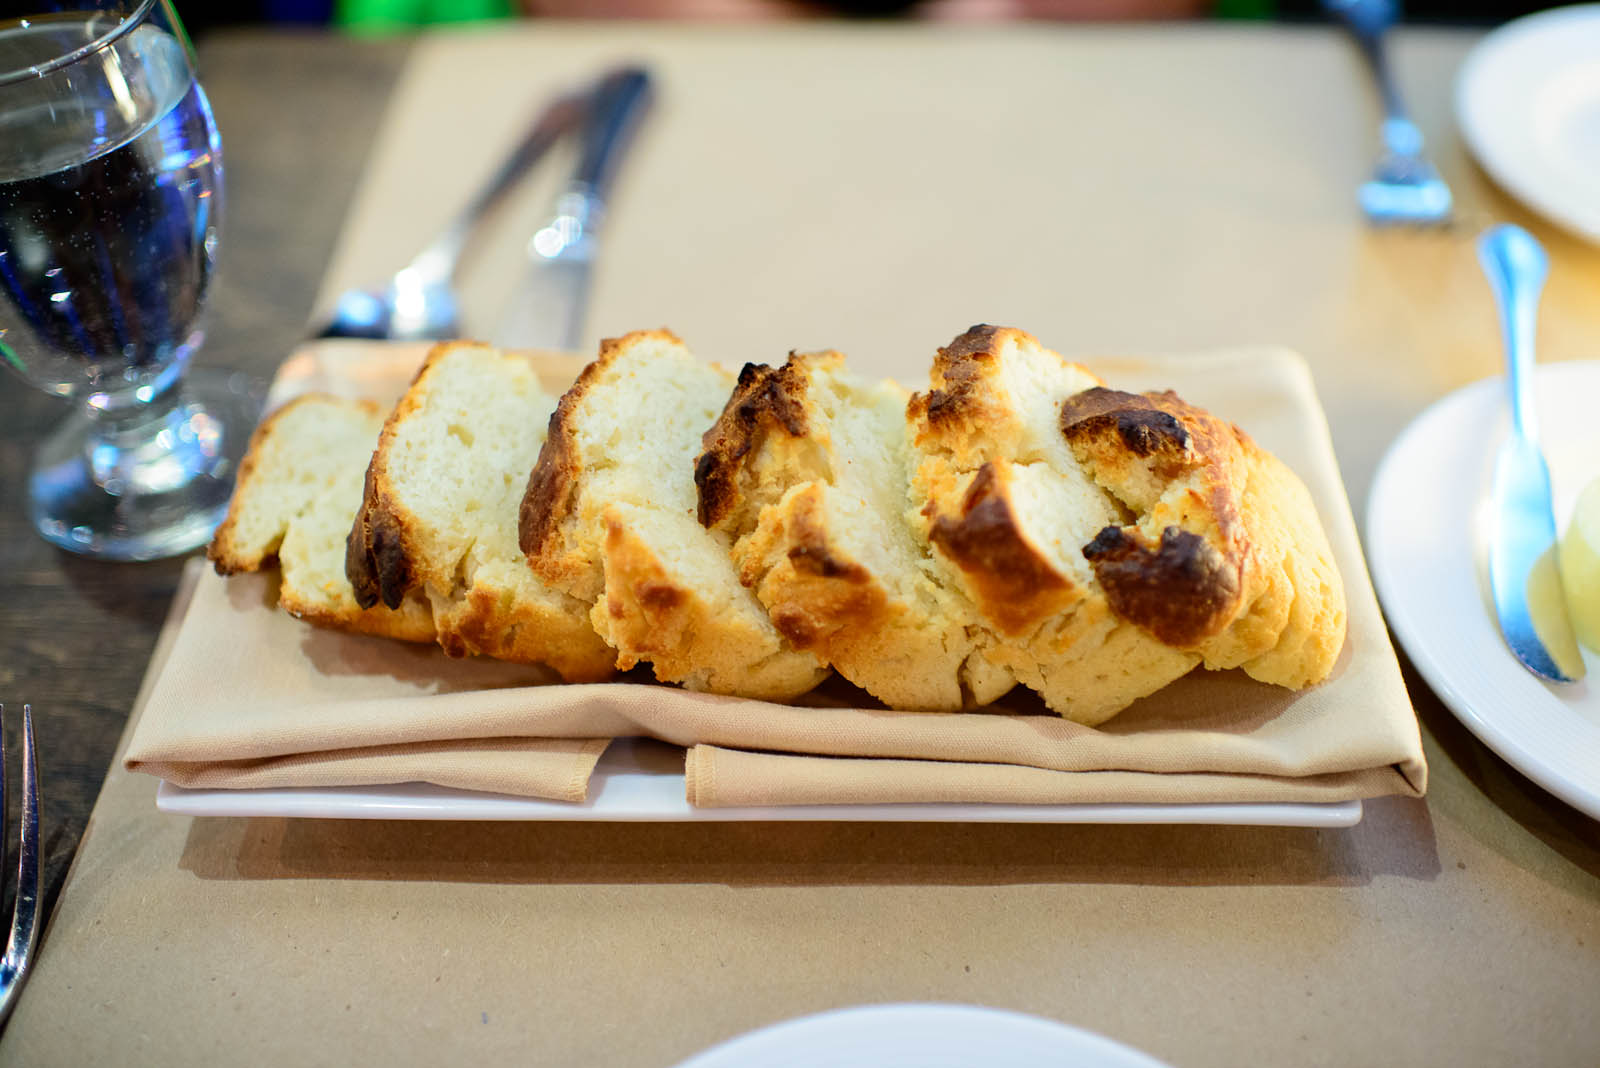 Whiskey bread and cultured butter ($5)